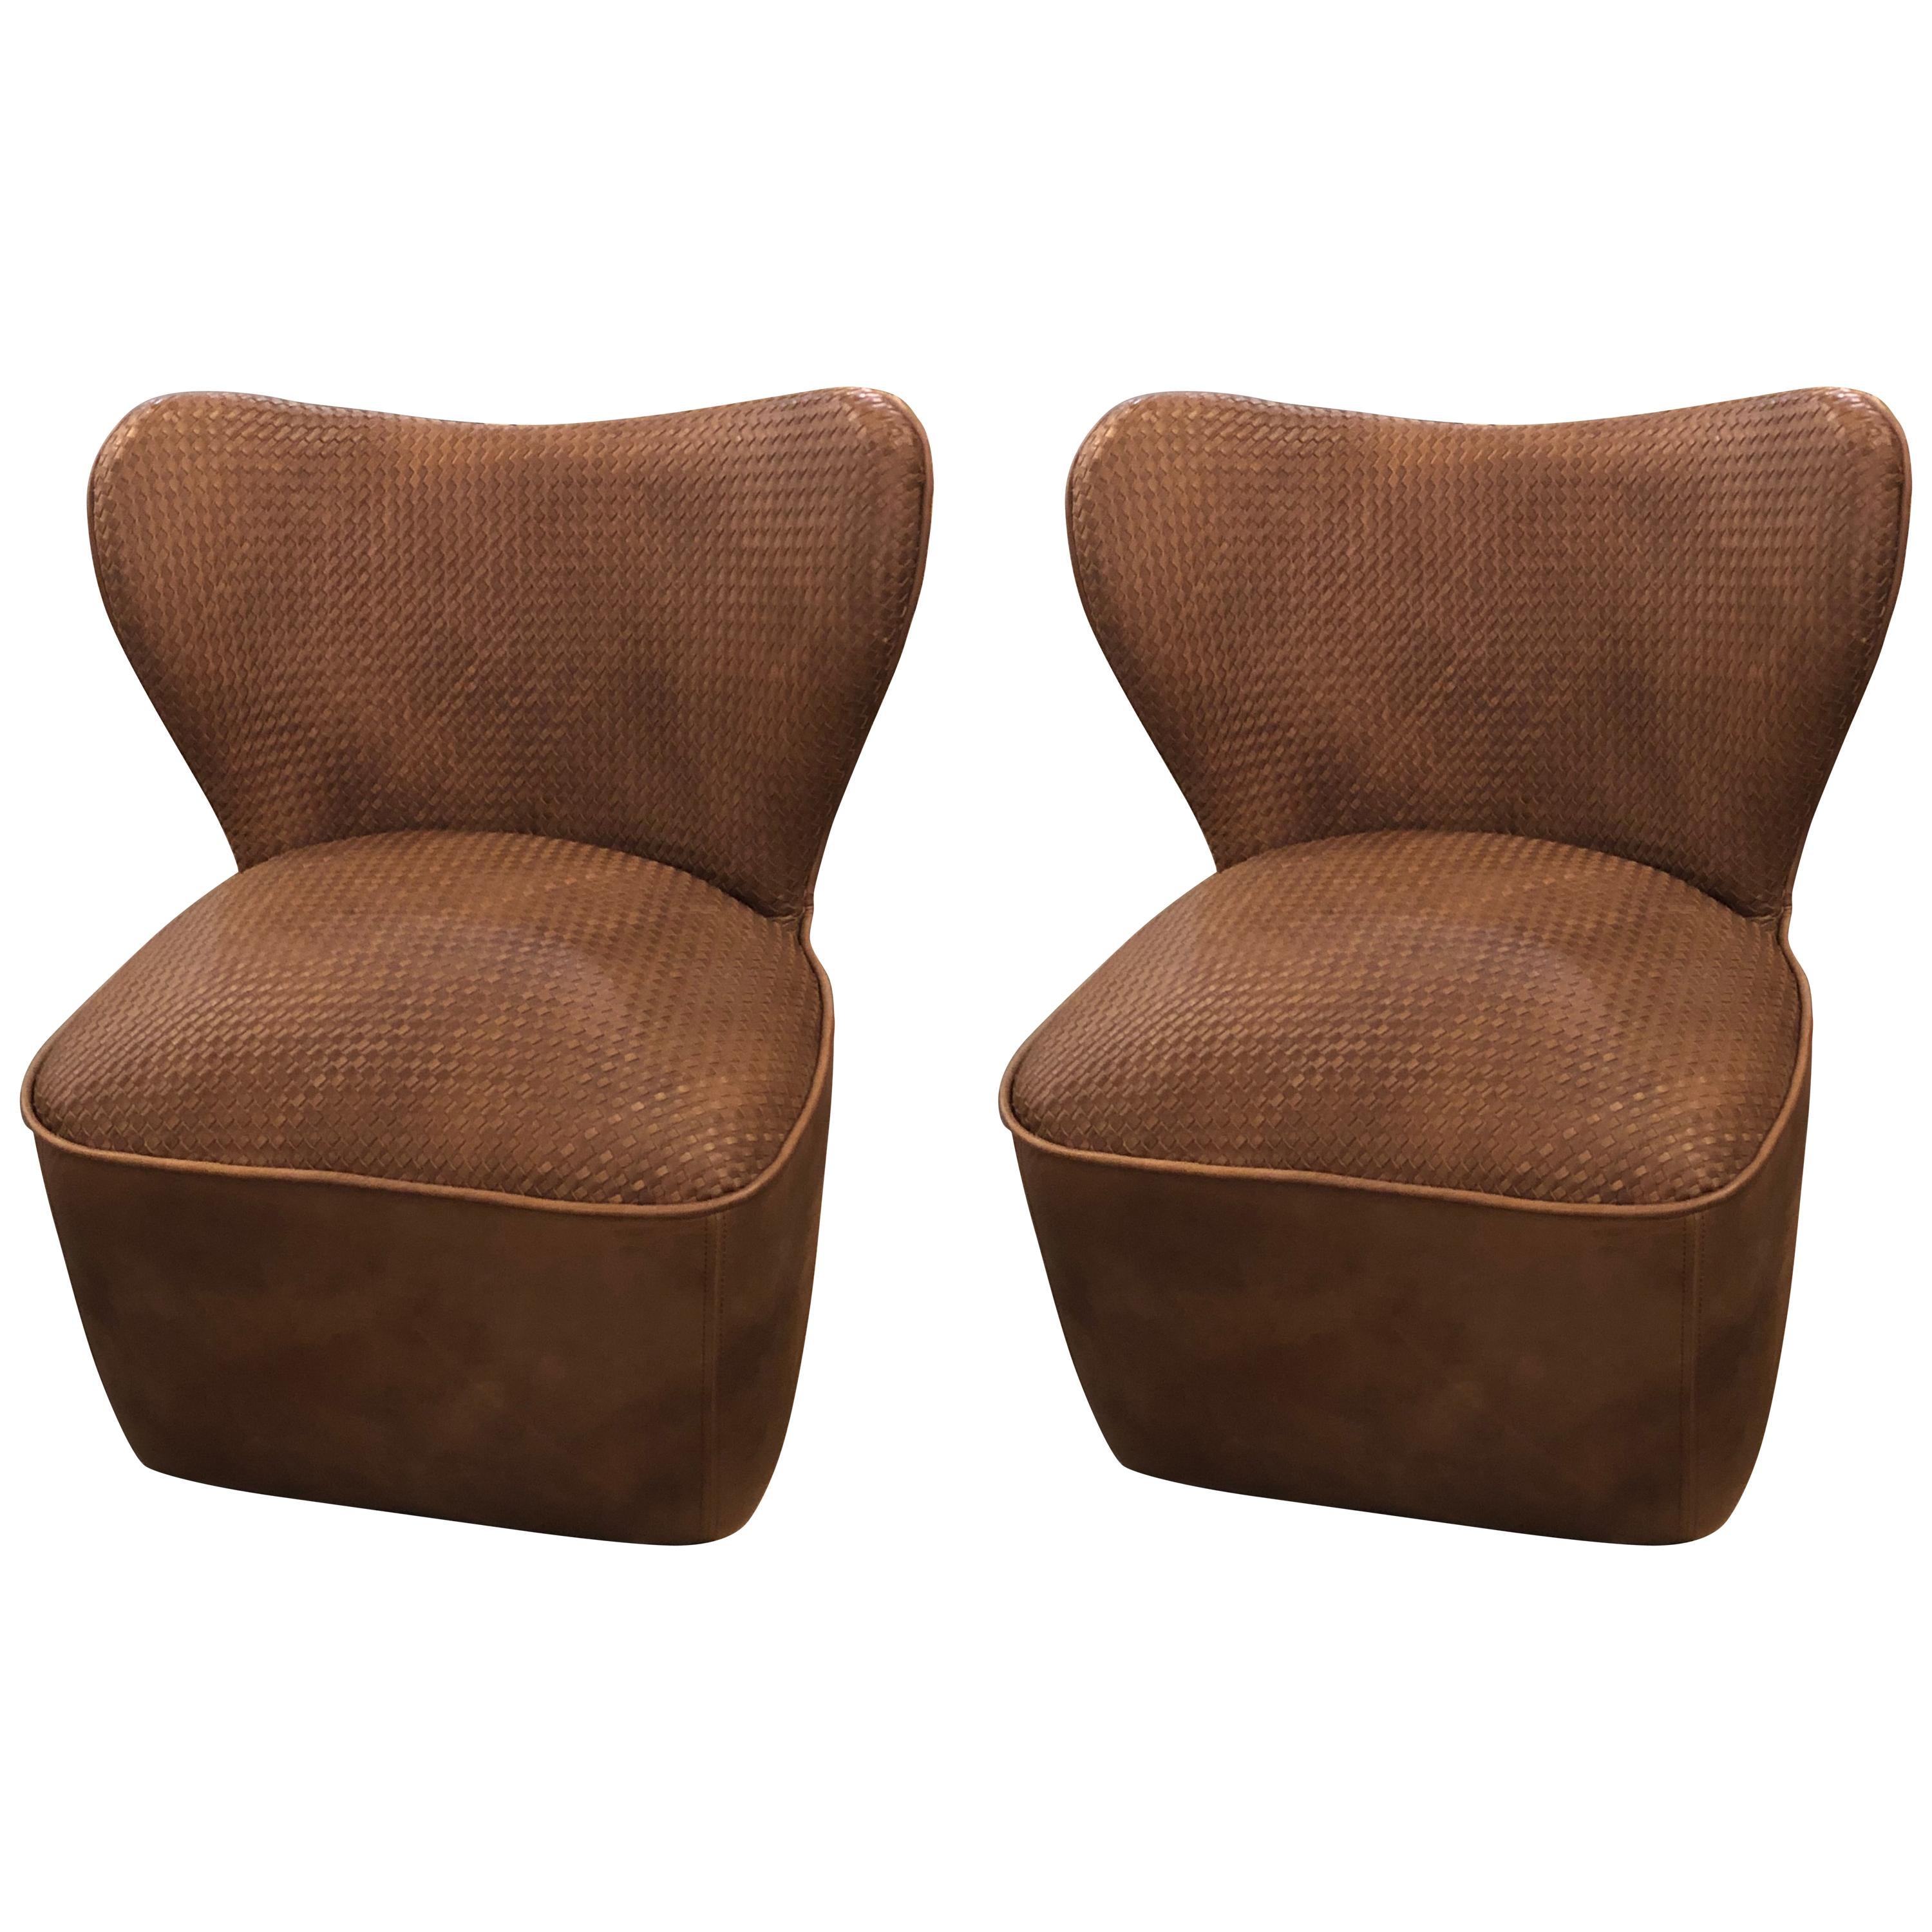 Pair of Modern Woven Brown Leather Seat and Backrest Side Chairs